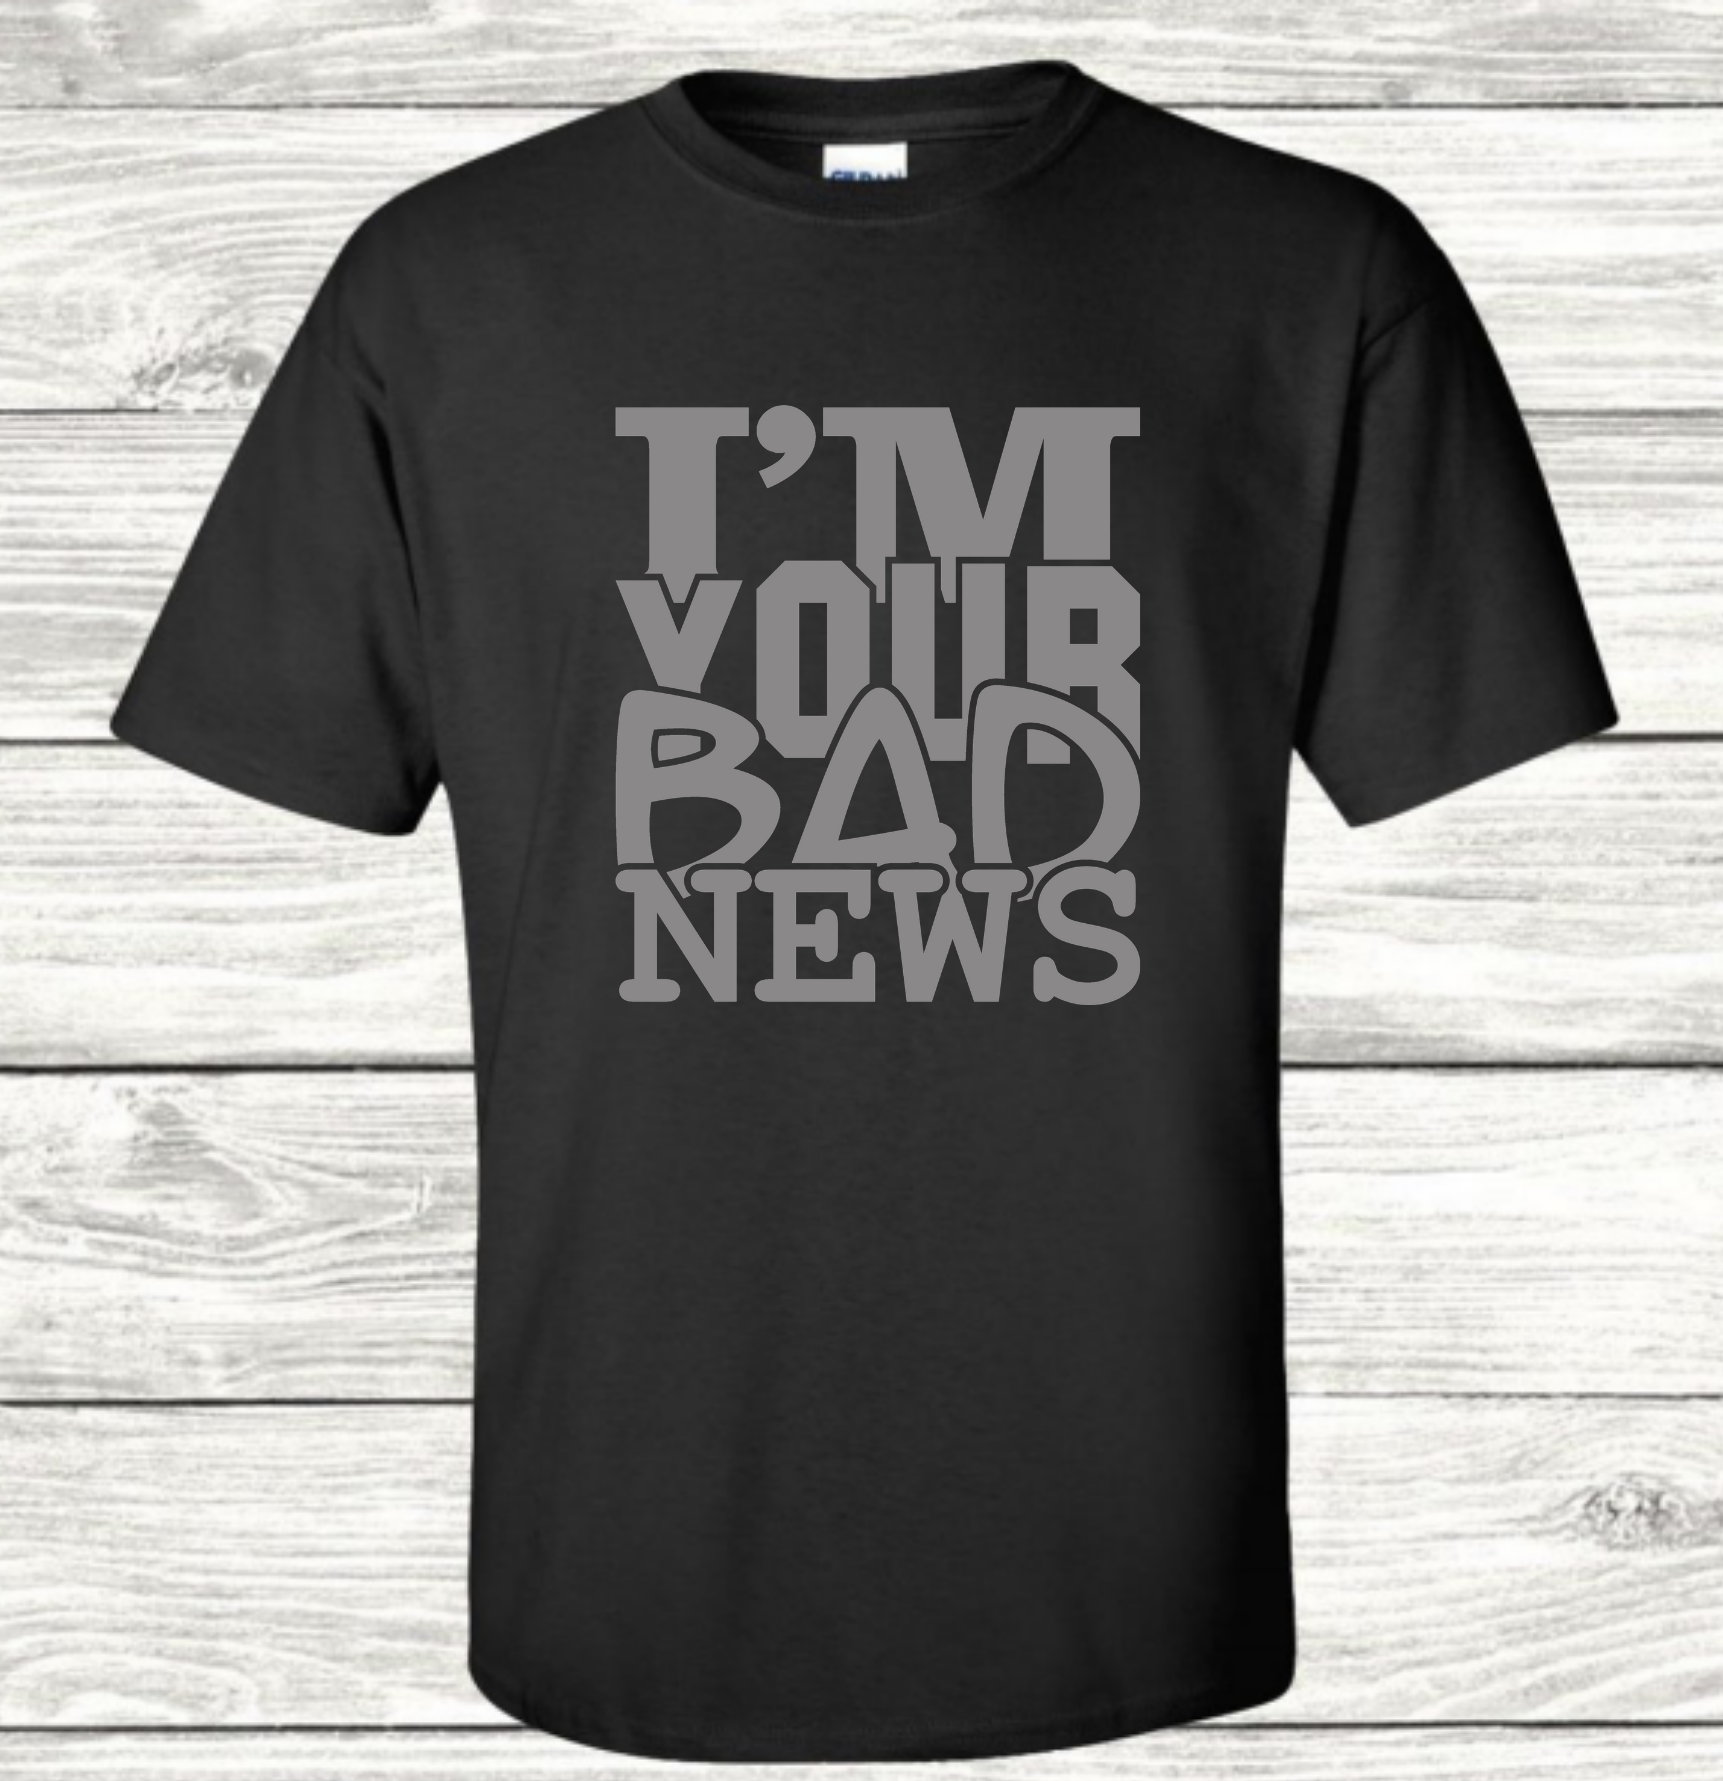 I'm Your Bad News - Graphic T-Shirt - Mister Snarky's